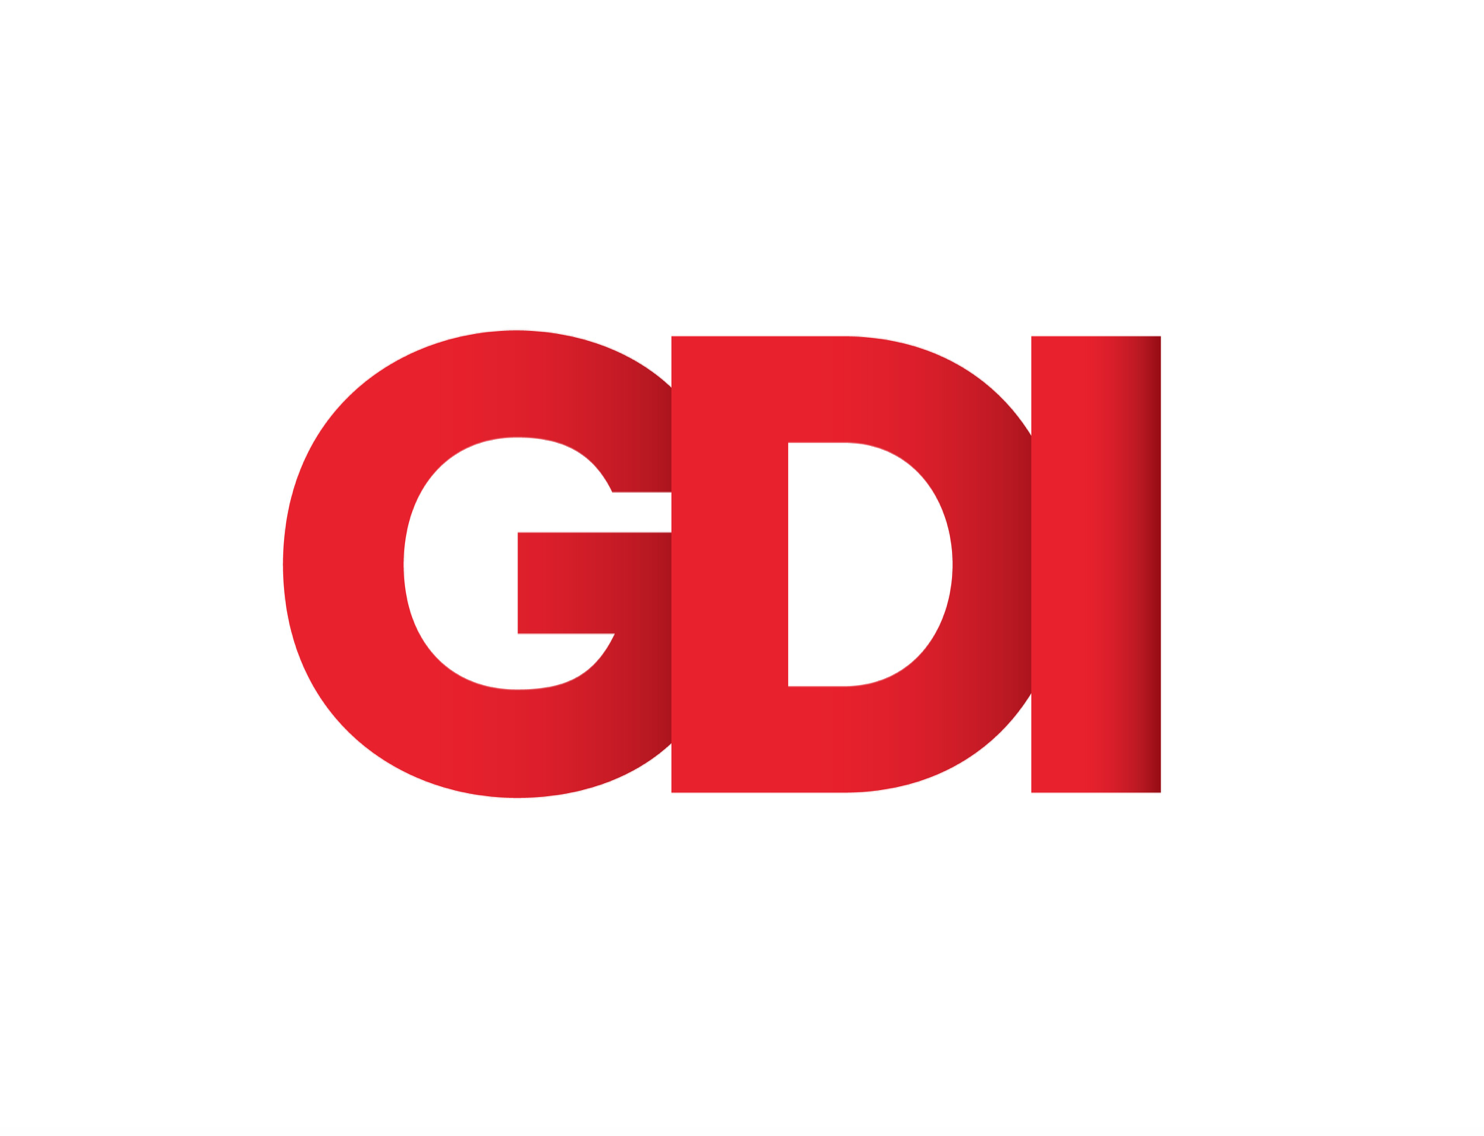 10 Stories Not To Miss On GDI This Week